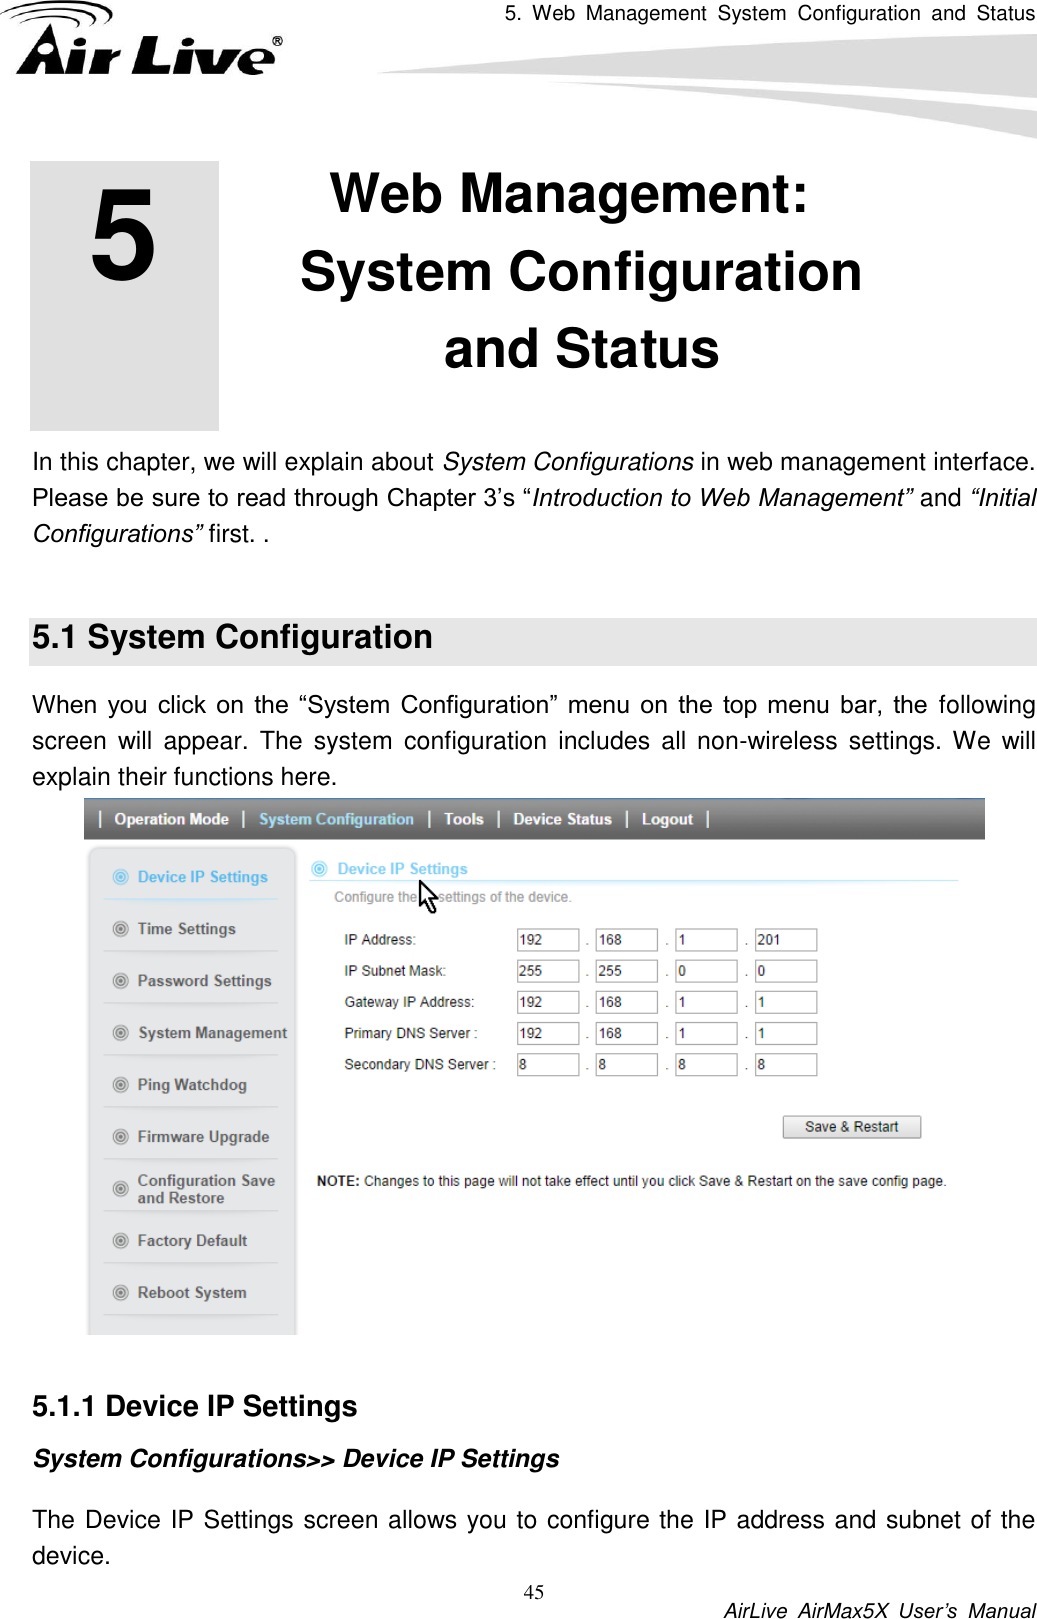 5.  Web  Management  System  Configuration  and  Status           AirLive  AirMax5X  User’s  Manual 45         In this chapter, we will explain about System Configurations in web management interface. Please be sure to read through Chapter 3’s “Introduction to Web Management” and “Initial Configurations” first. .    5.1 System Configuration When you  click  on  the  “System  Configuration”  menu  on  the  top menu  bar,  the following screen  will appear.  The  system  configuration  includes  all  non-wireless  settings.  We will explain their functions here.   5.1.1 Device IP Settings System Configurations&gt;&gt; Device IP Settings The Device IP Settings screen allows you to configure the IP address and subnet of the device.   5 5. Web Management: System Configuration and Status  